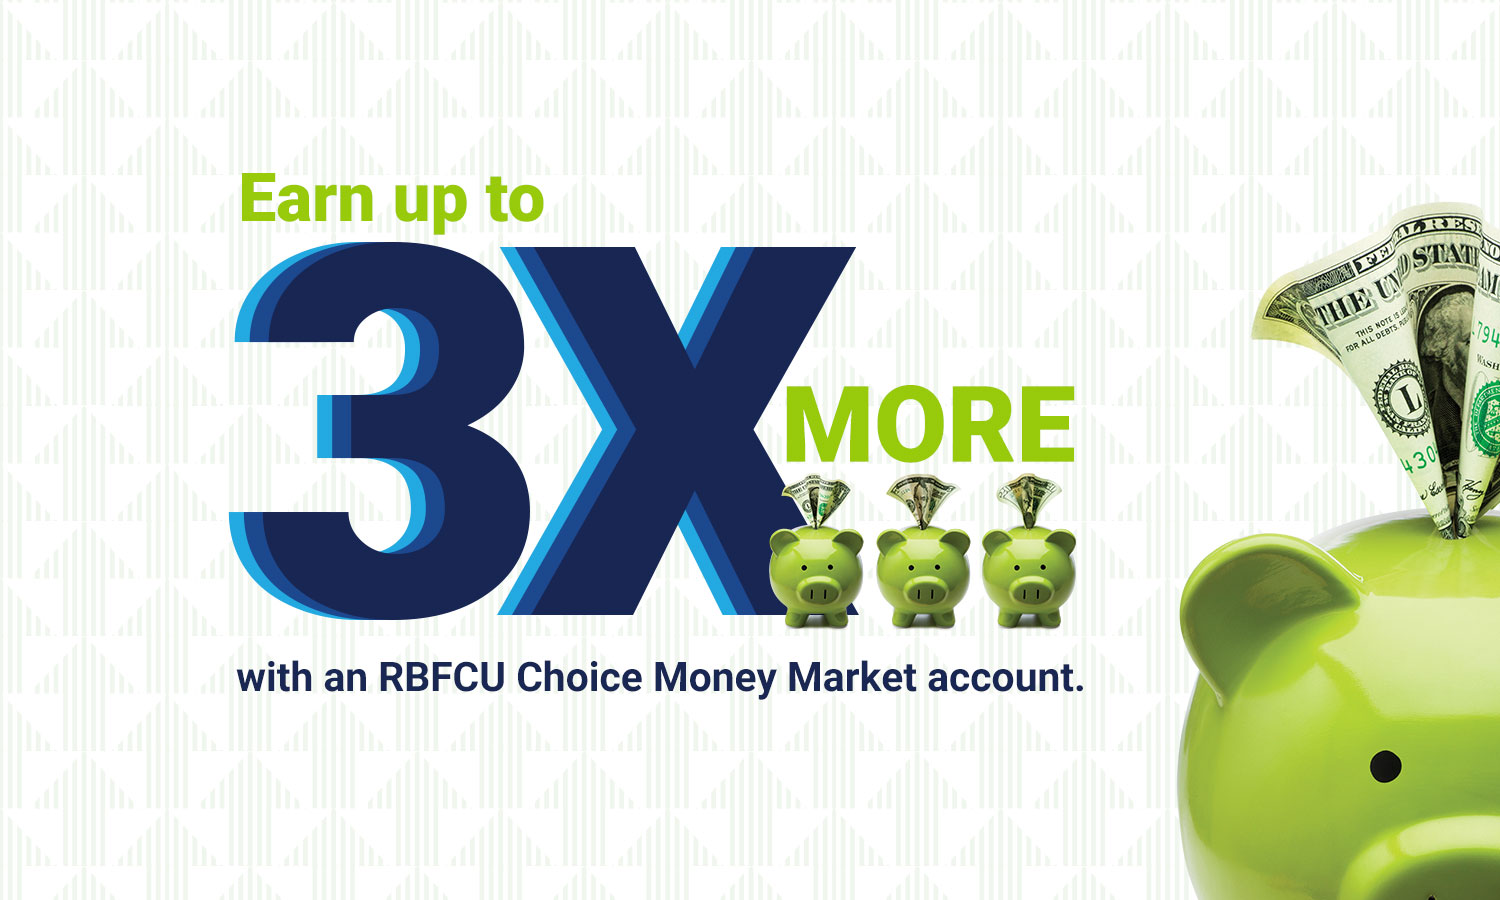 Banking, Auto, Loans, Credit Cards, Mortgages | RBFCU - Texas